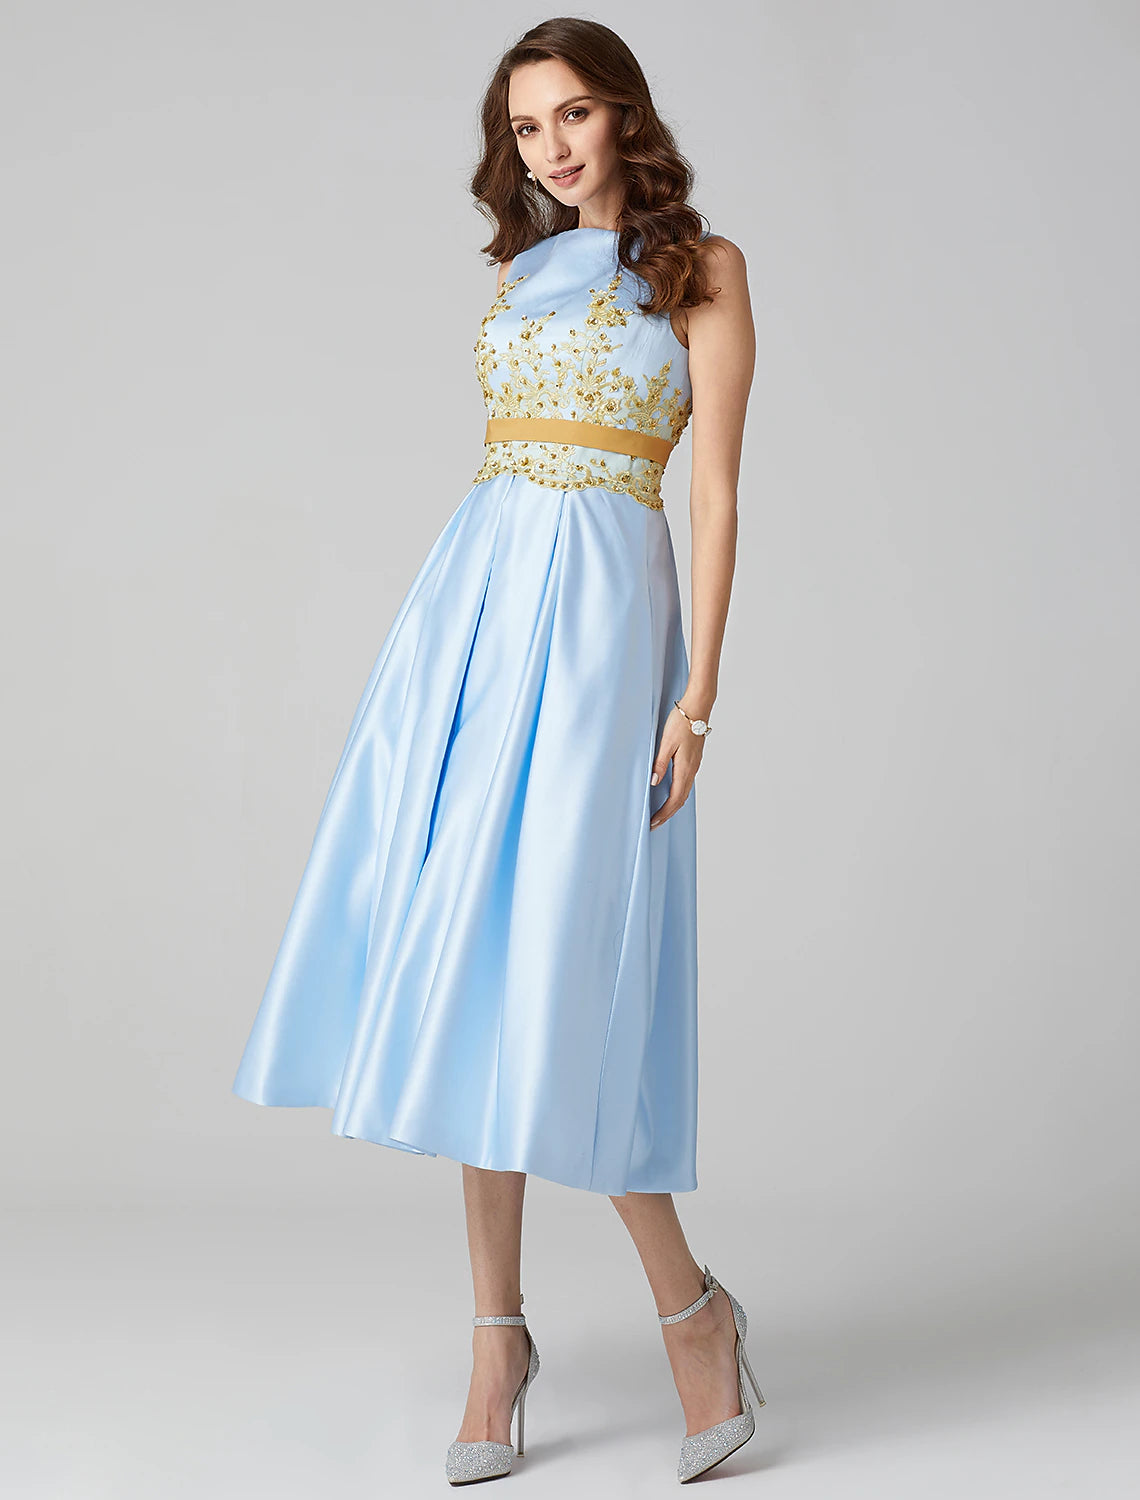 A-Line Cocktail Dresses Party Dress Wedding Guest Tea Length Sleeveless Jewel Neck Satin V Back with Pleats Appliques